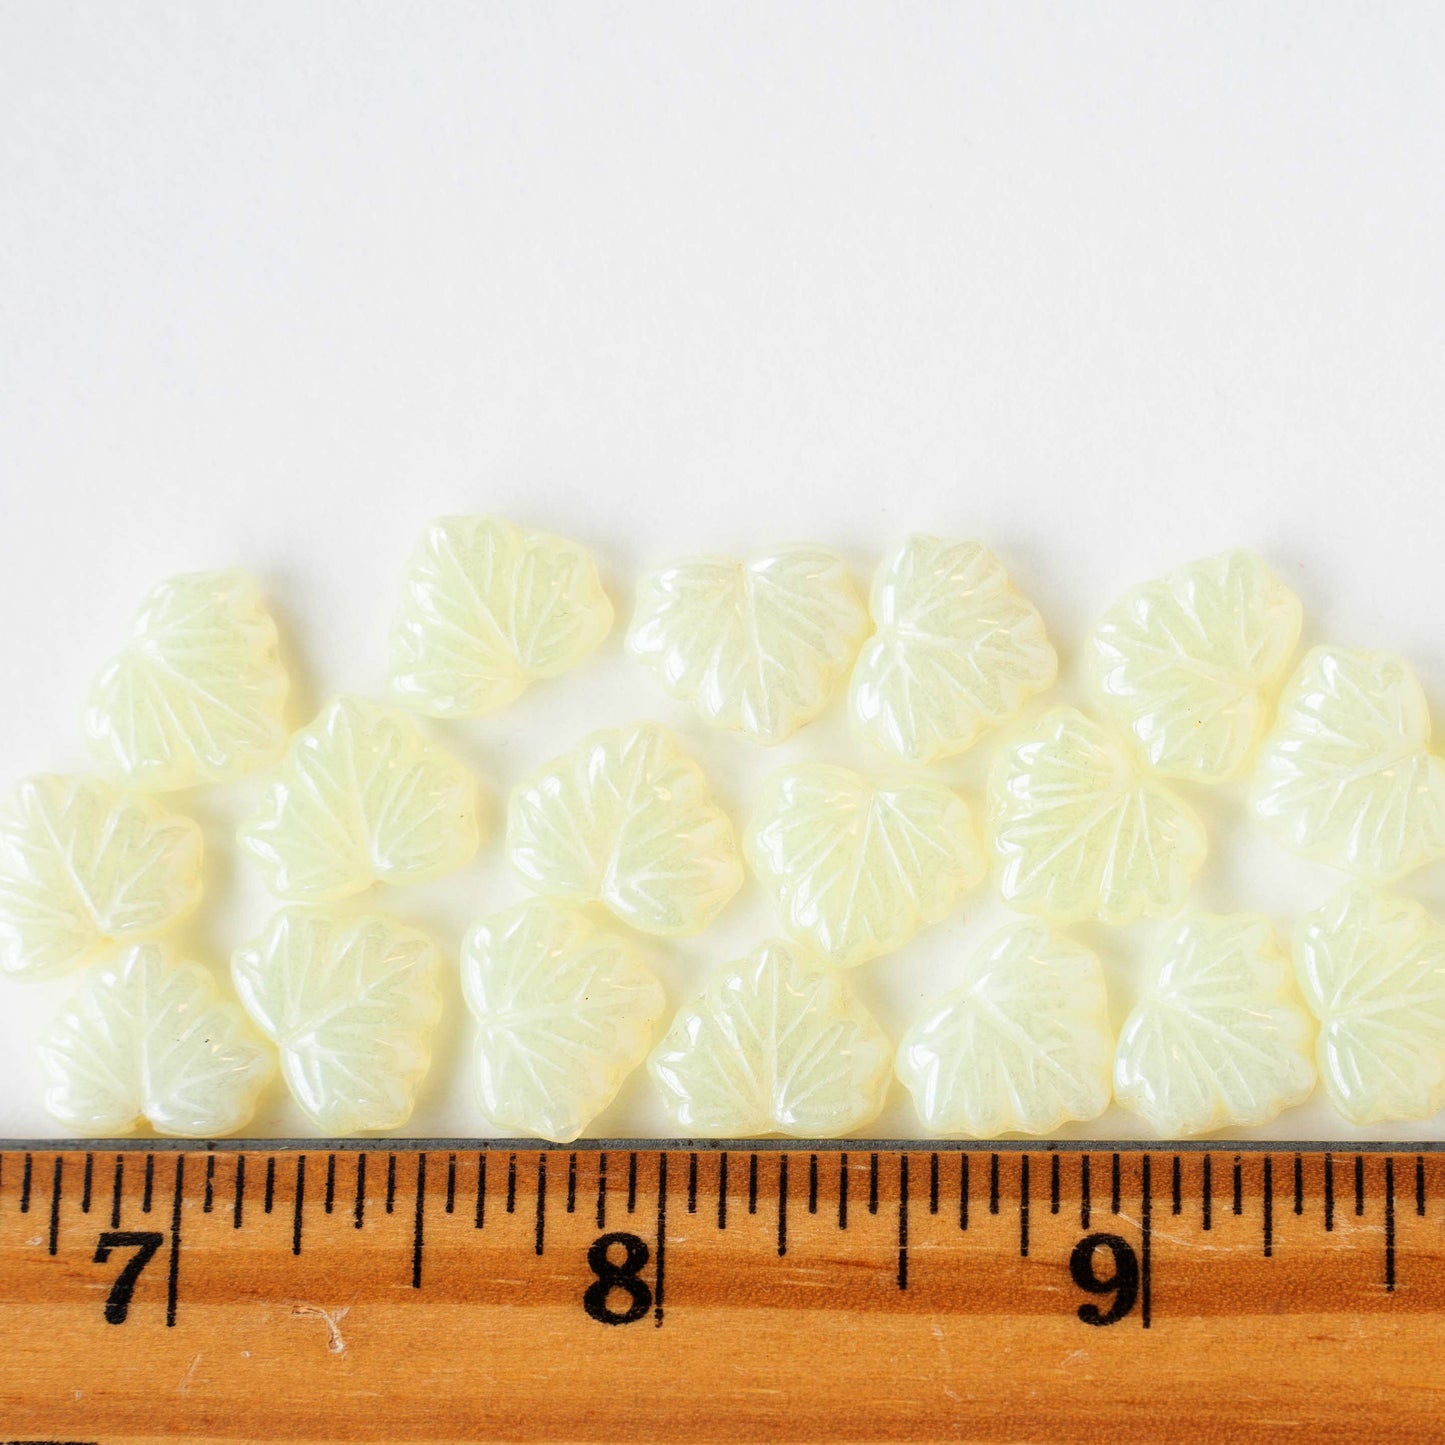 13mm Maple Leaf Beads -  Yellow Opaline Luster - 10 or 20 Beads